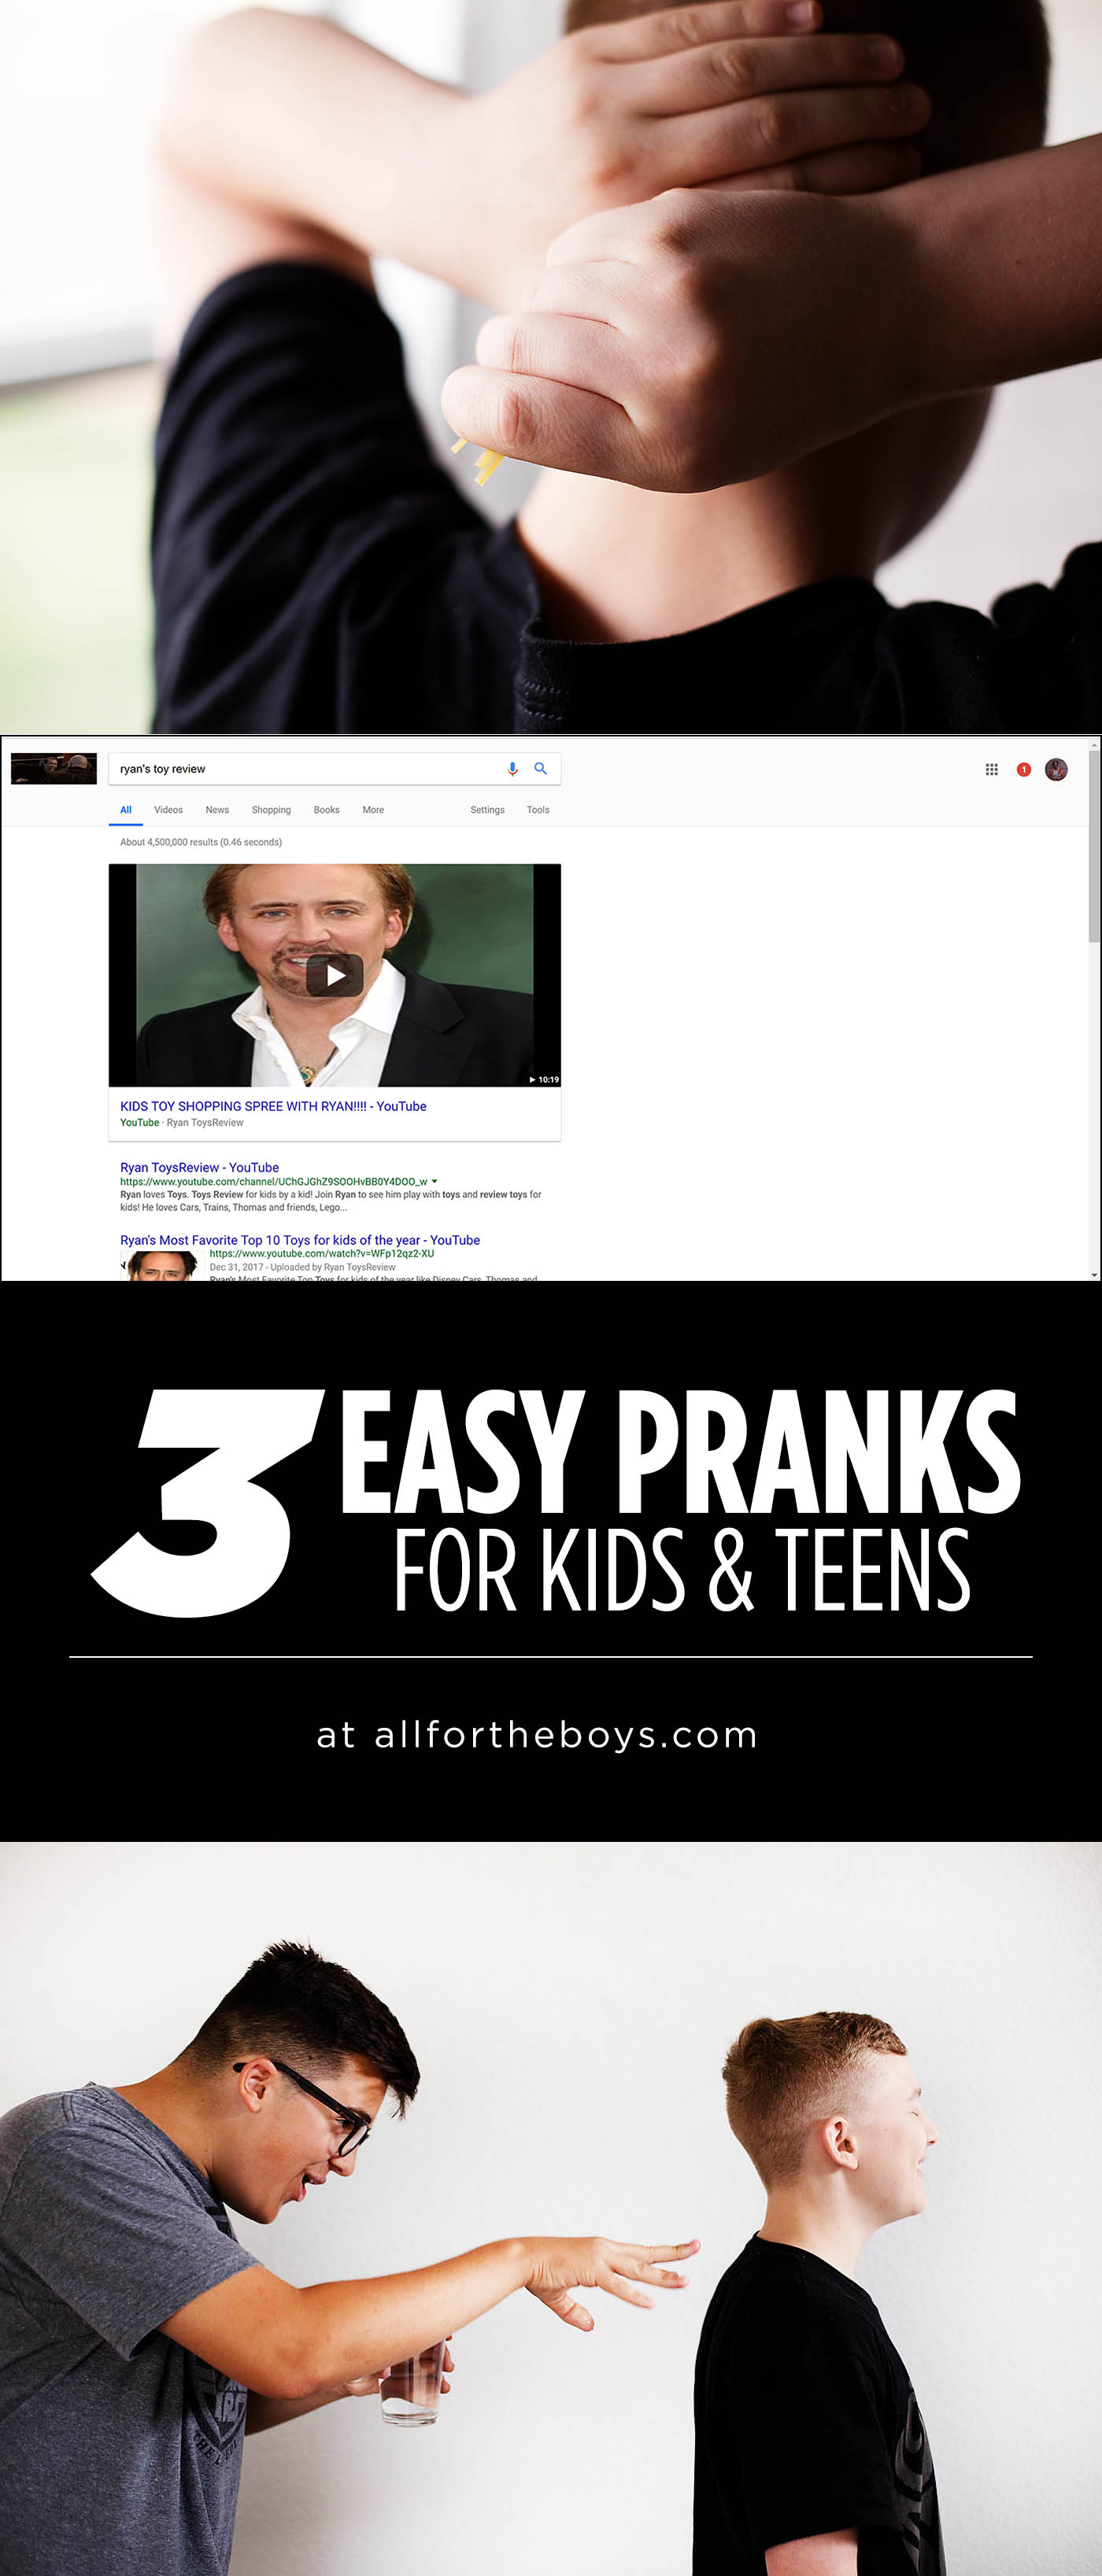 Easy pranks for kids and teens